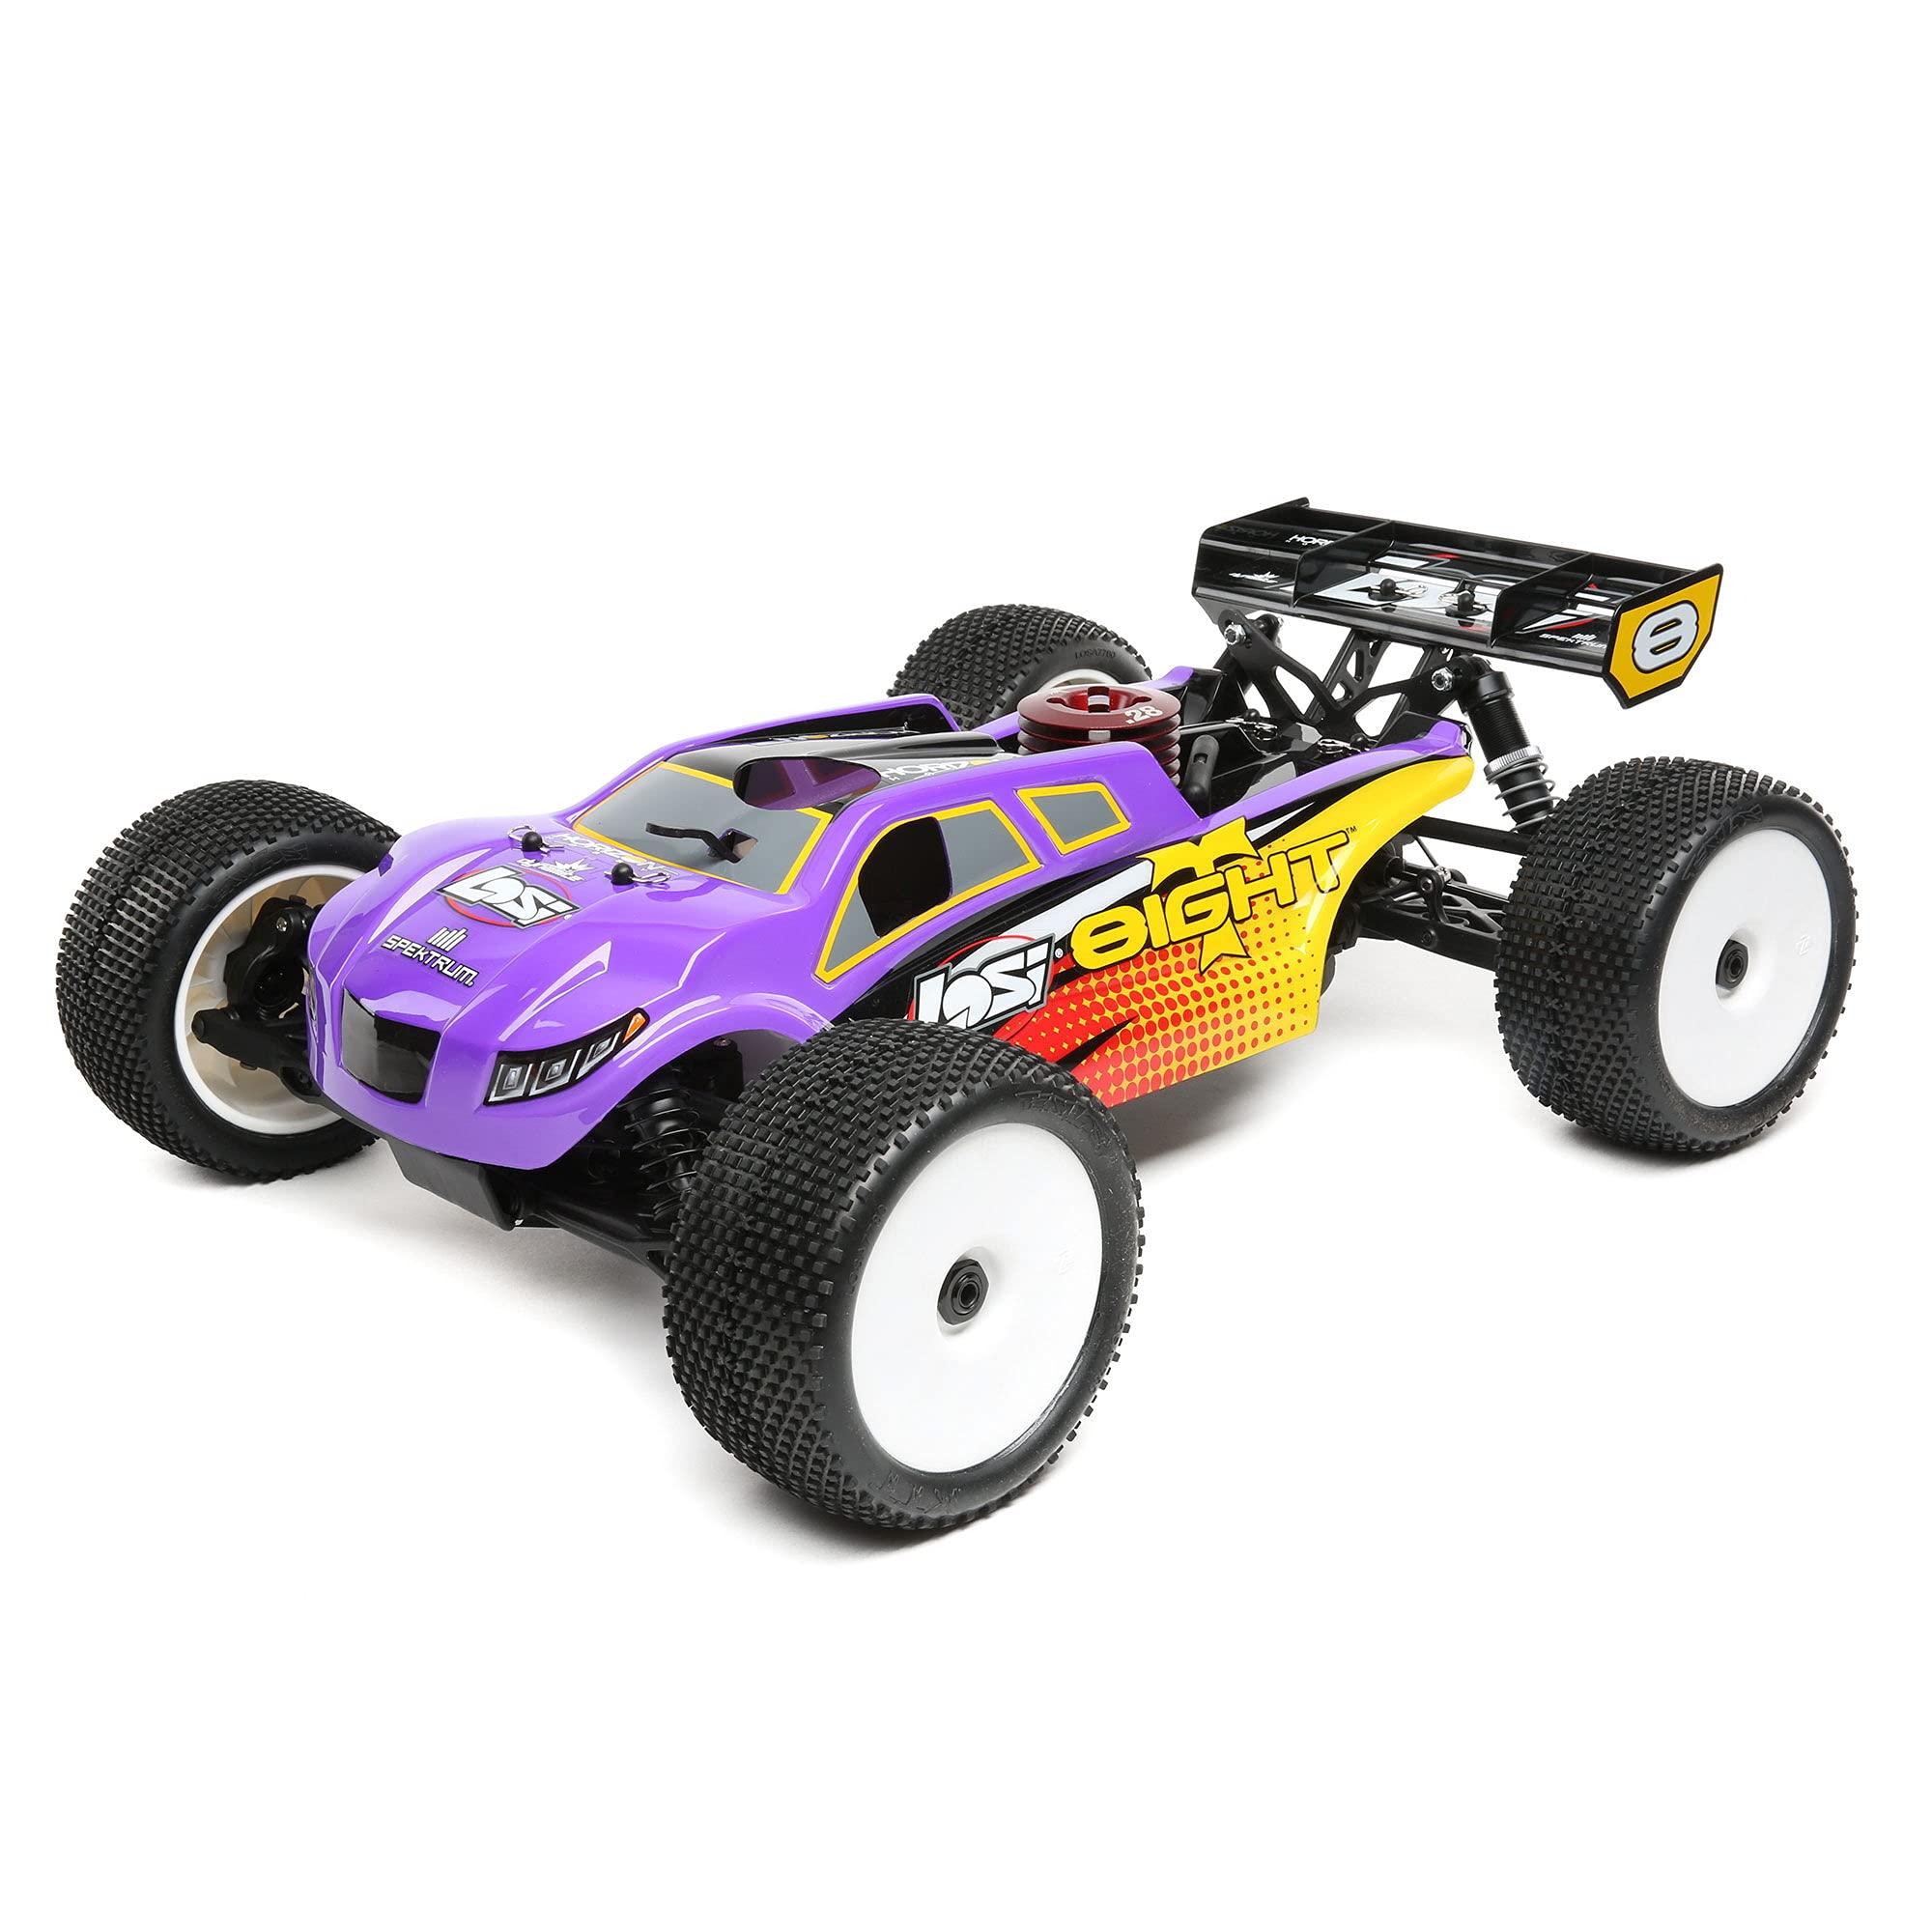 Rc Truggy 1/8: Maintenance and Care for Your RC Truggy 1/8